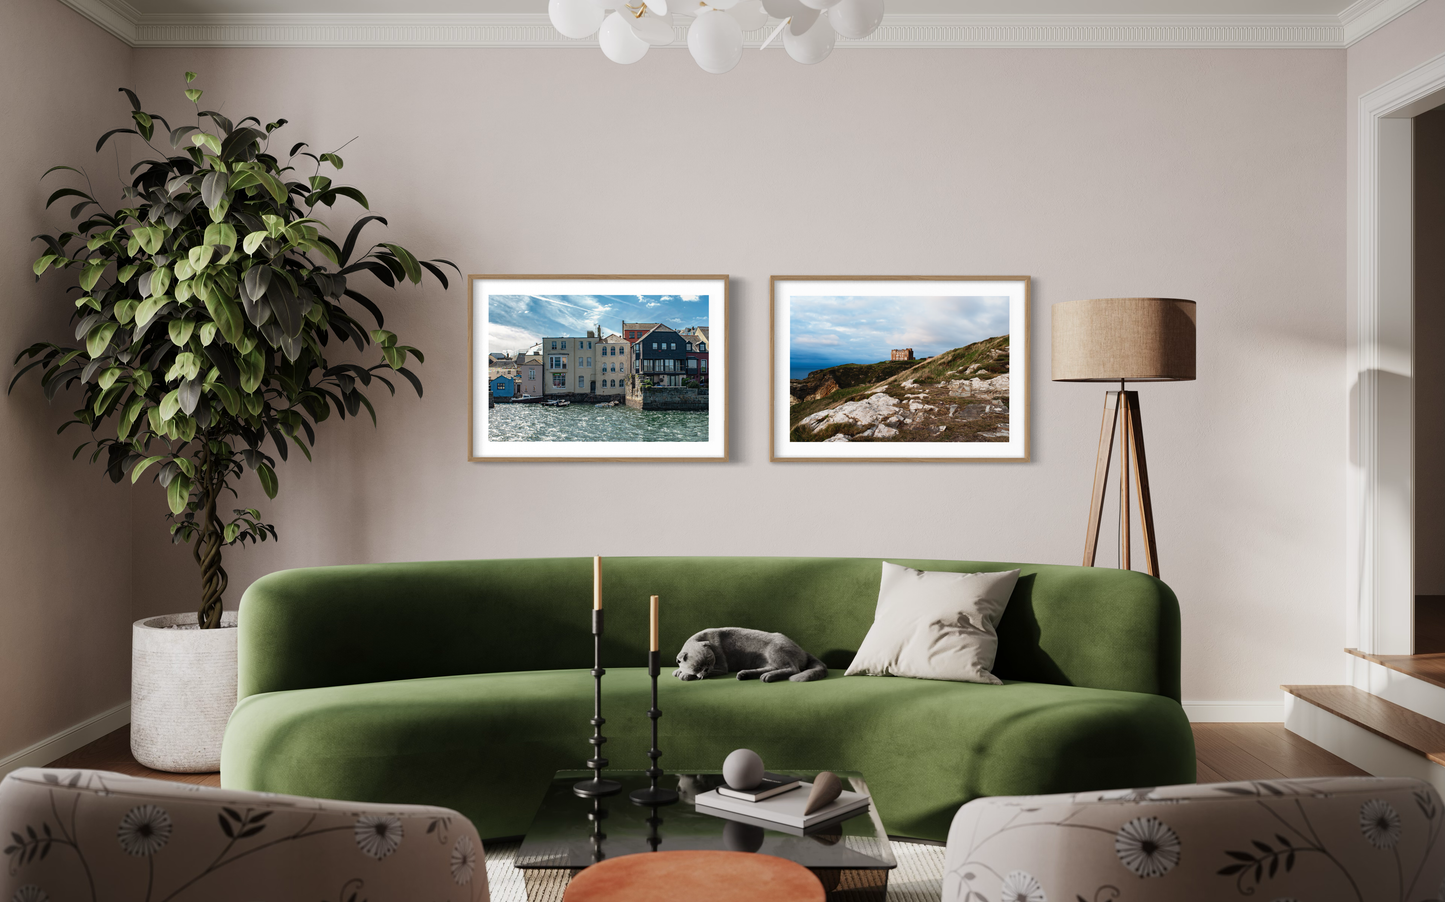 Houses of St. Mawes Framed & Mounted Print